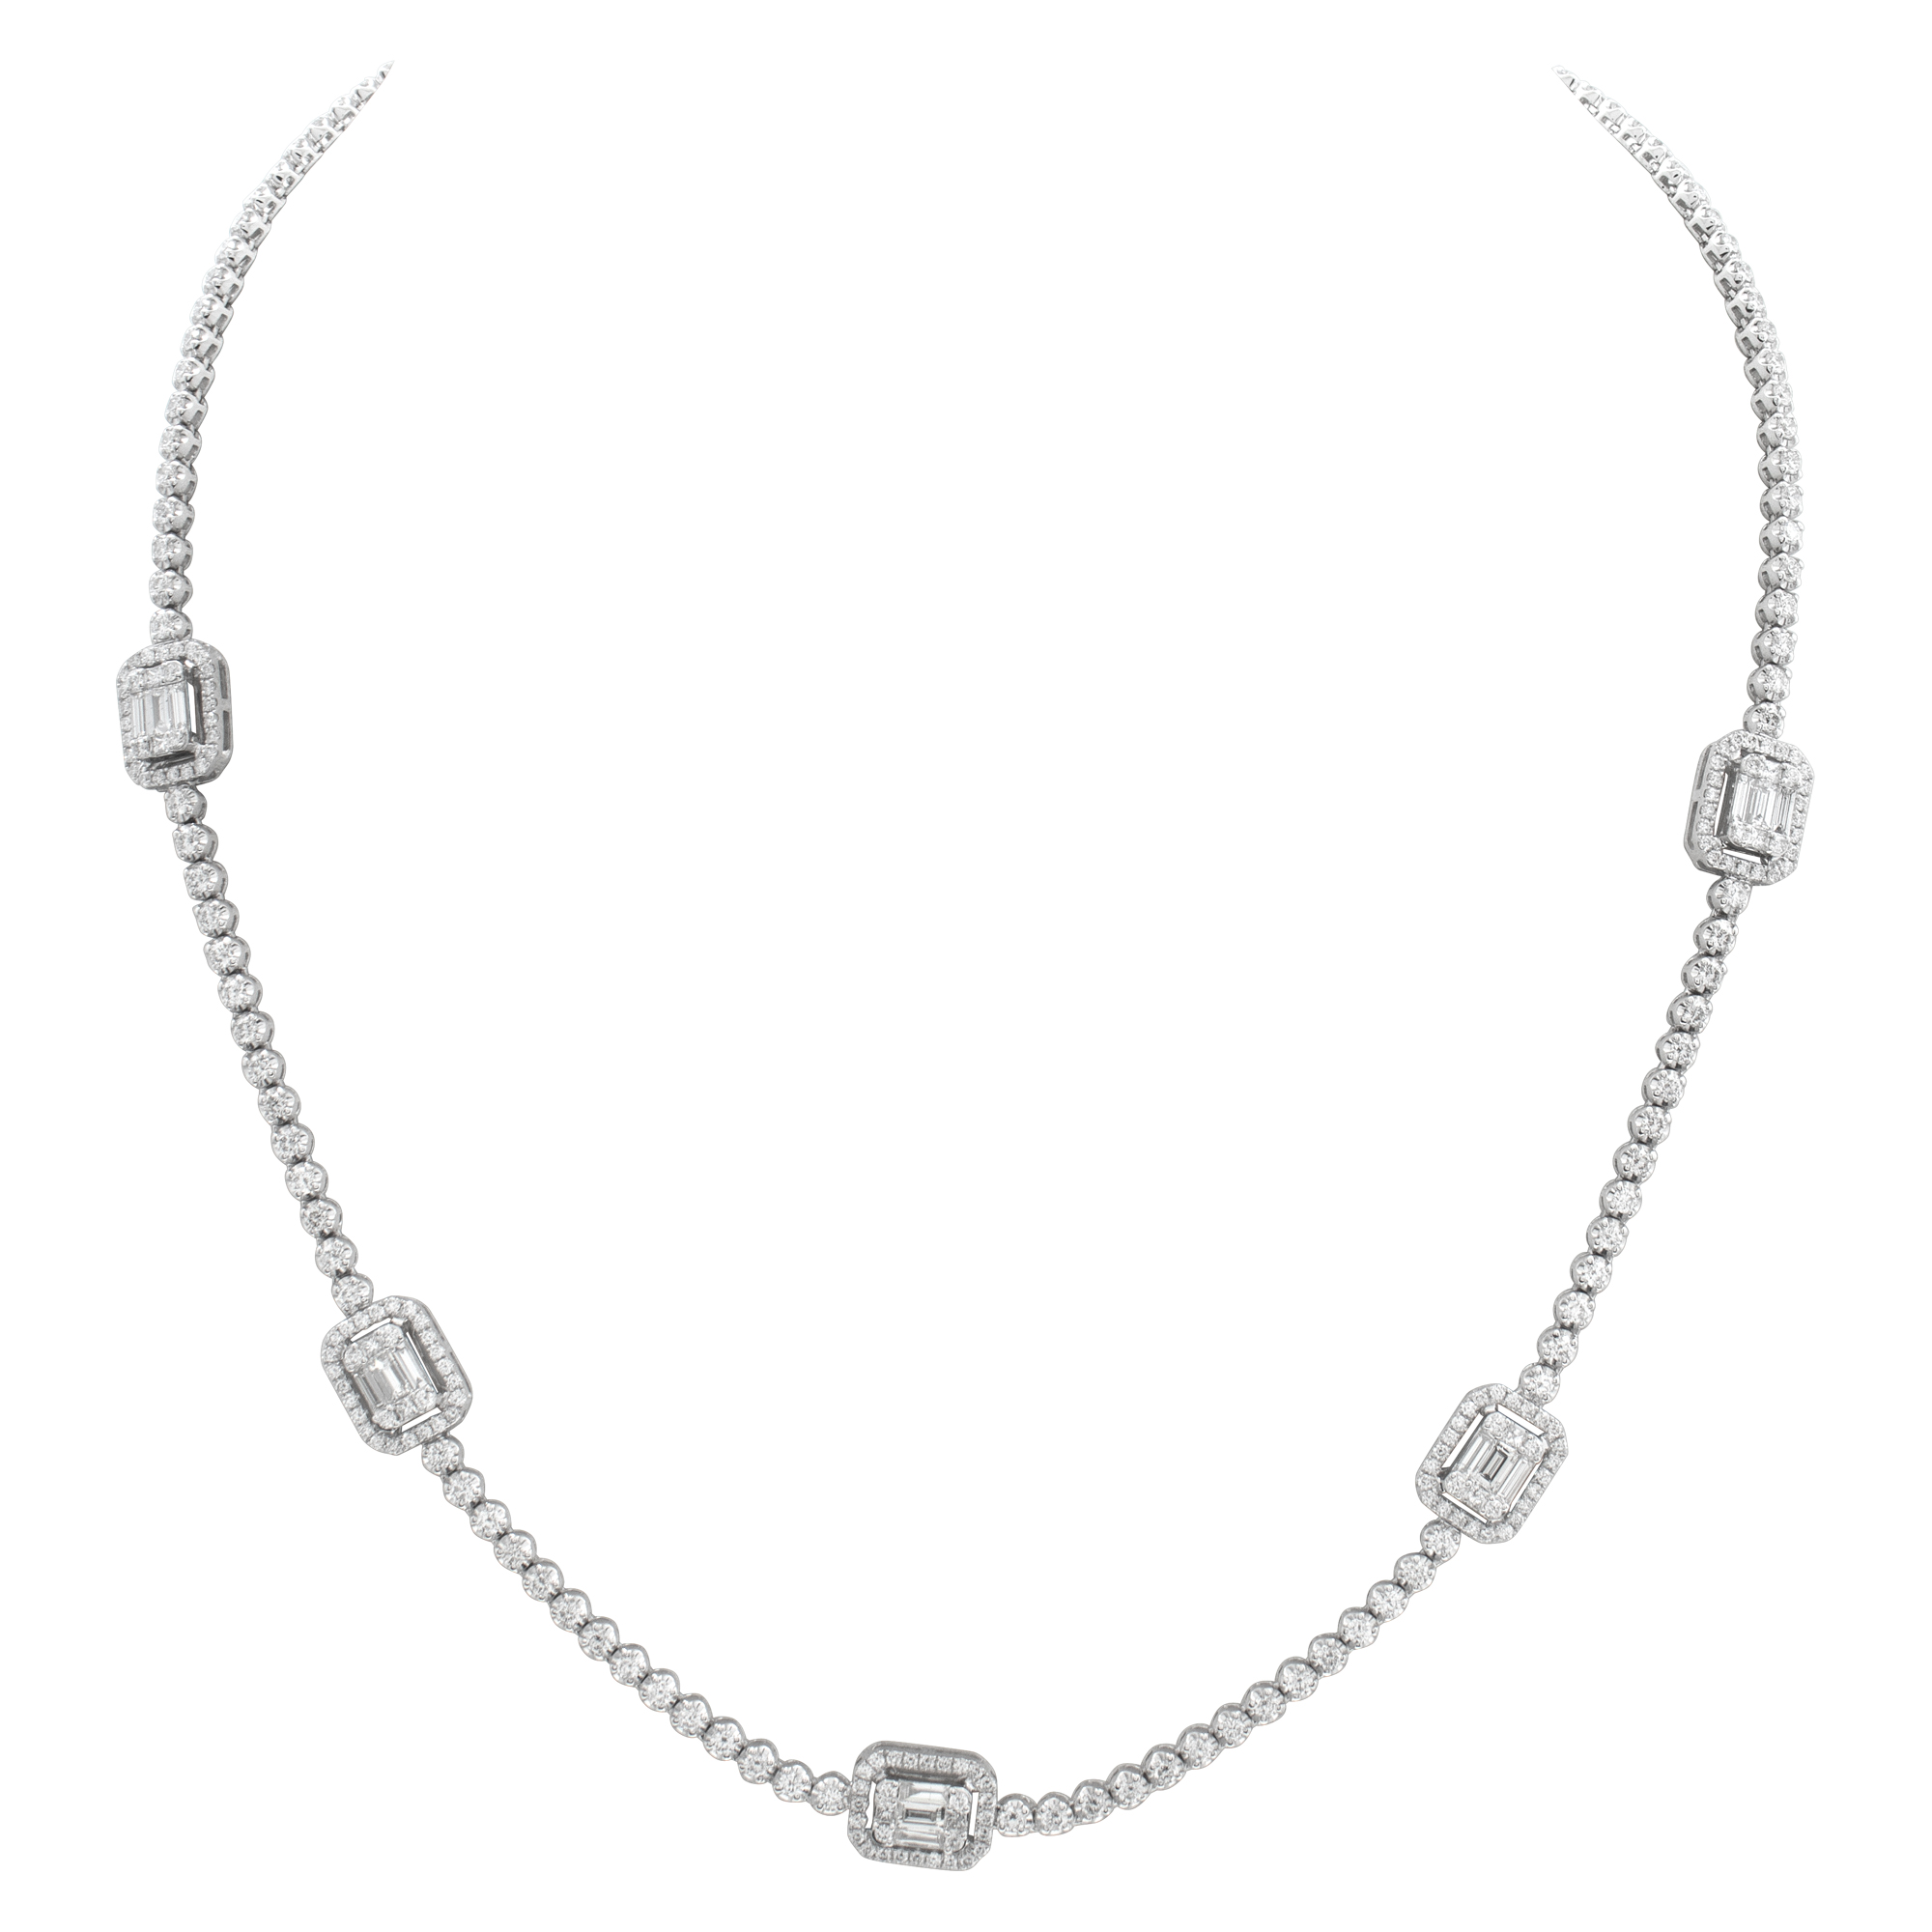 Diamond line necklace with baguette diamond stations in 18k white gold image 1